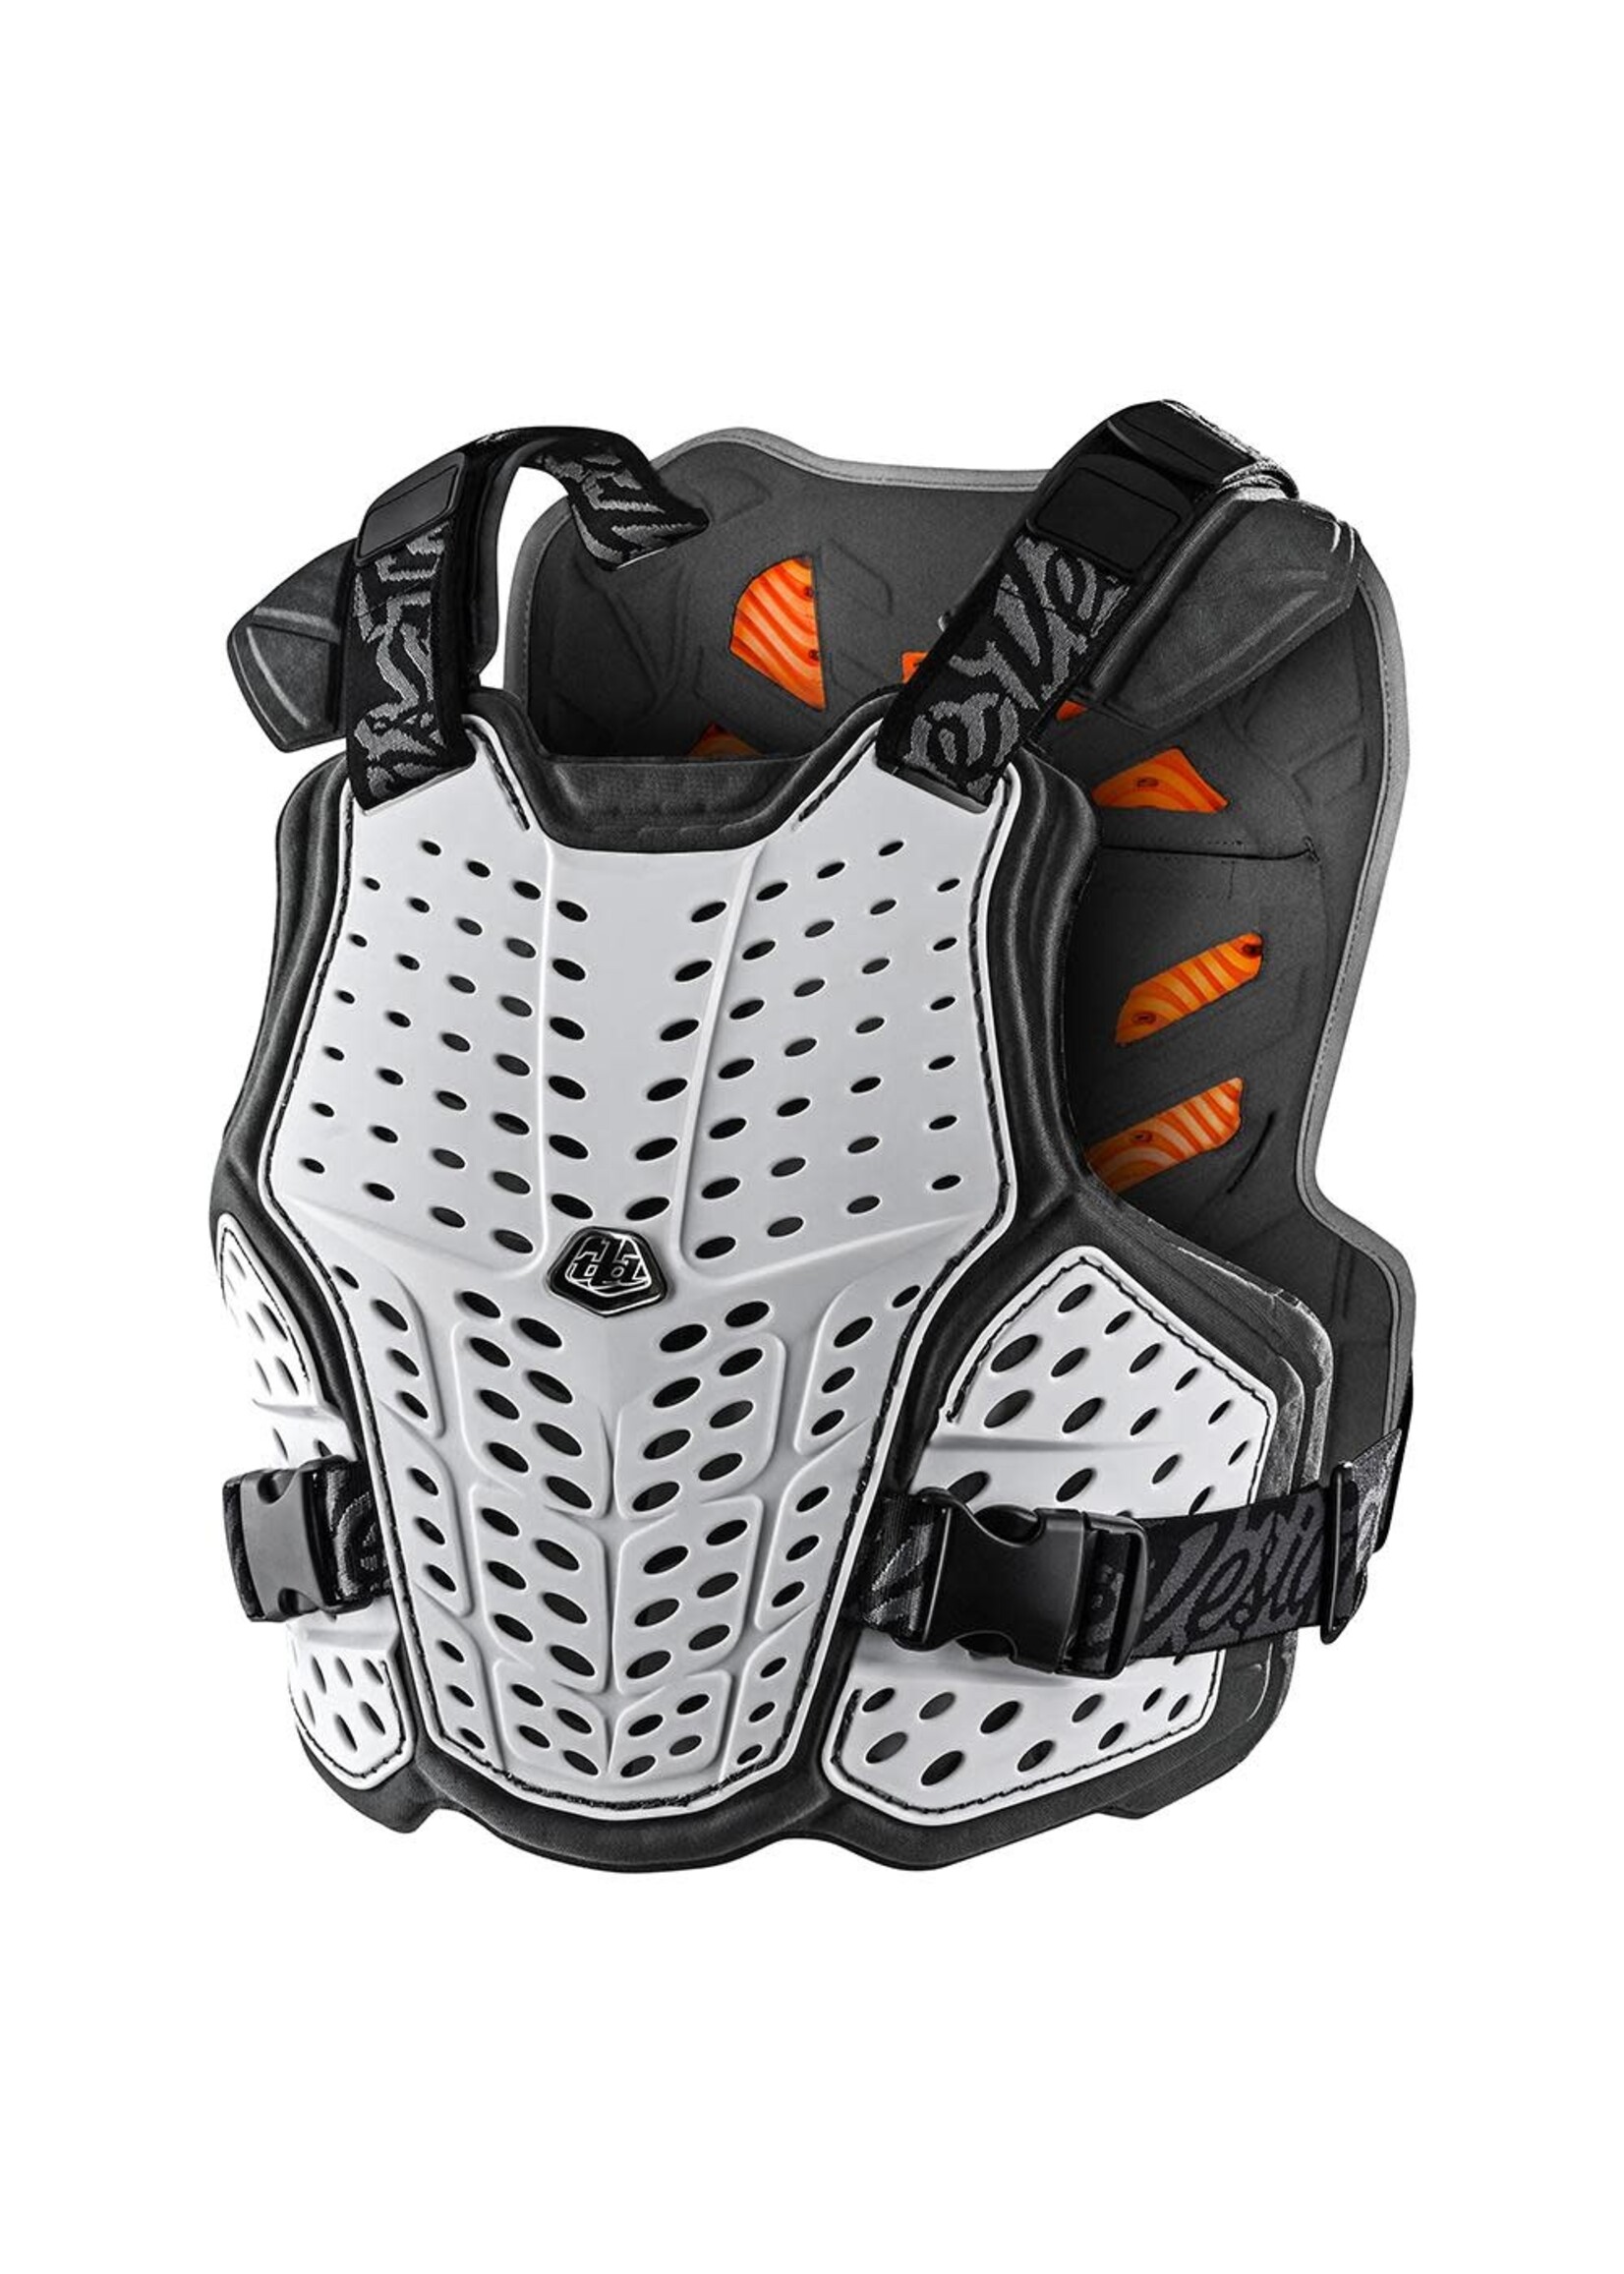 TROY LEE DESIGNS Rockfight CE Chest Protector